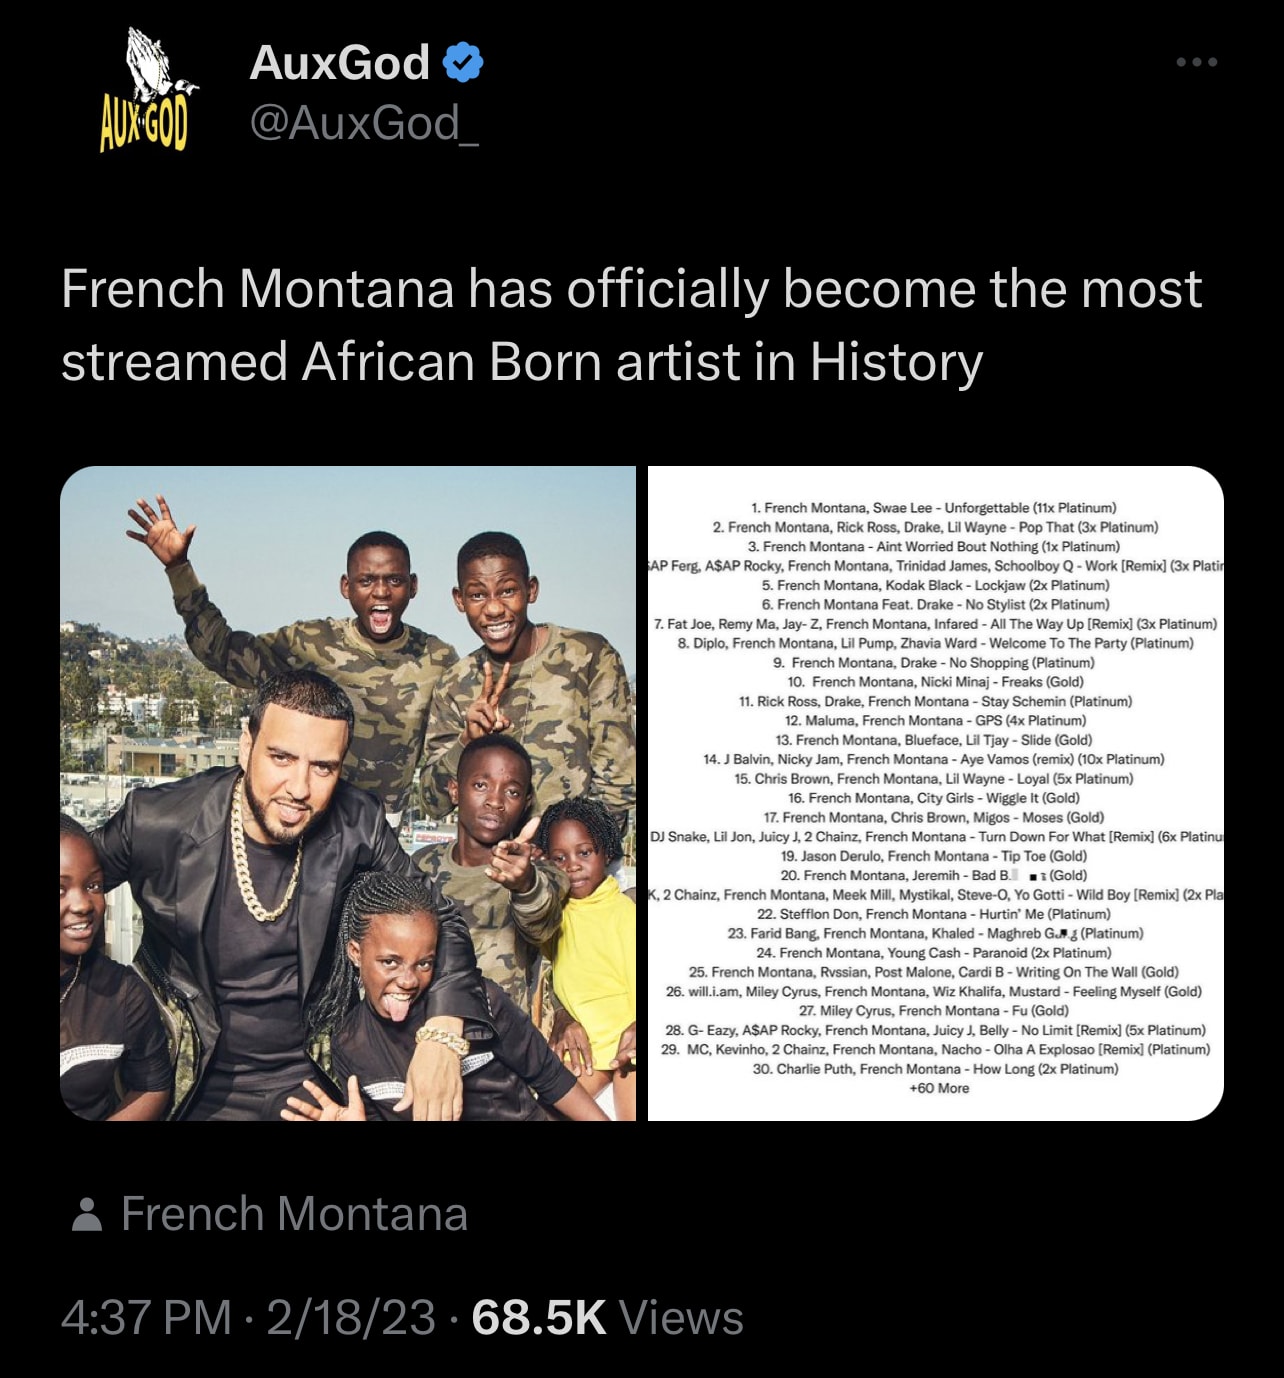 Twitter post showing french montana streaming feat